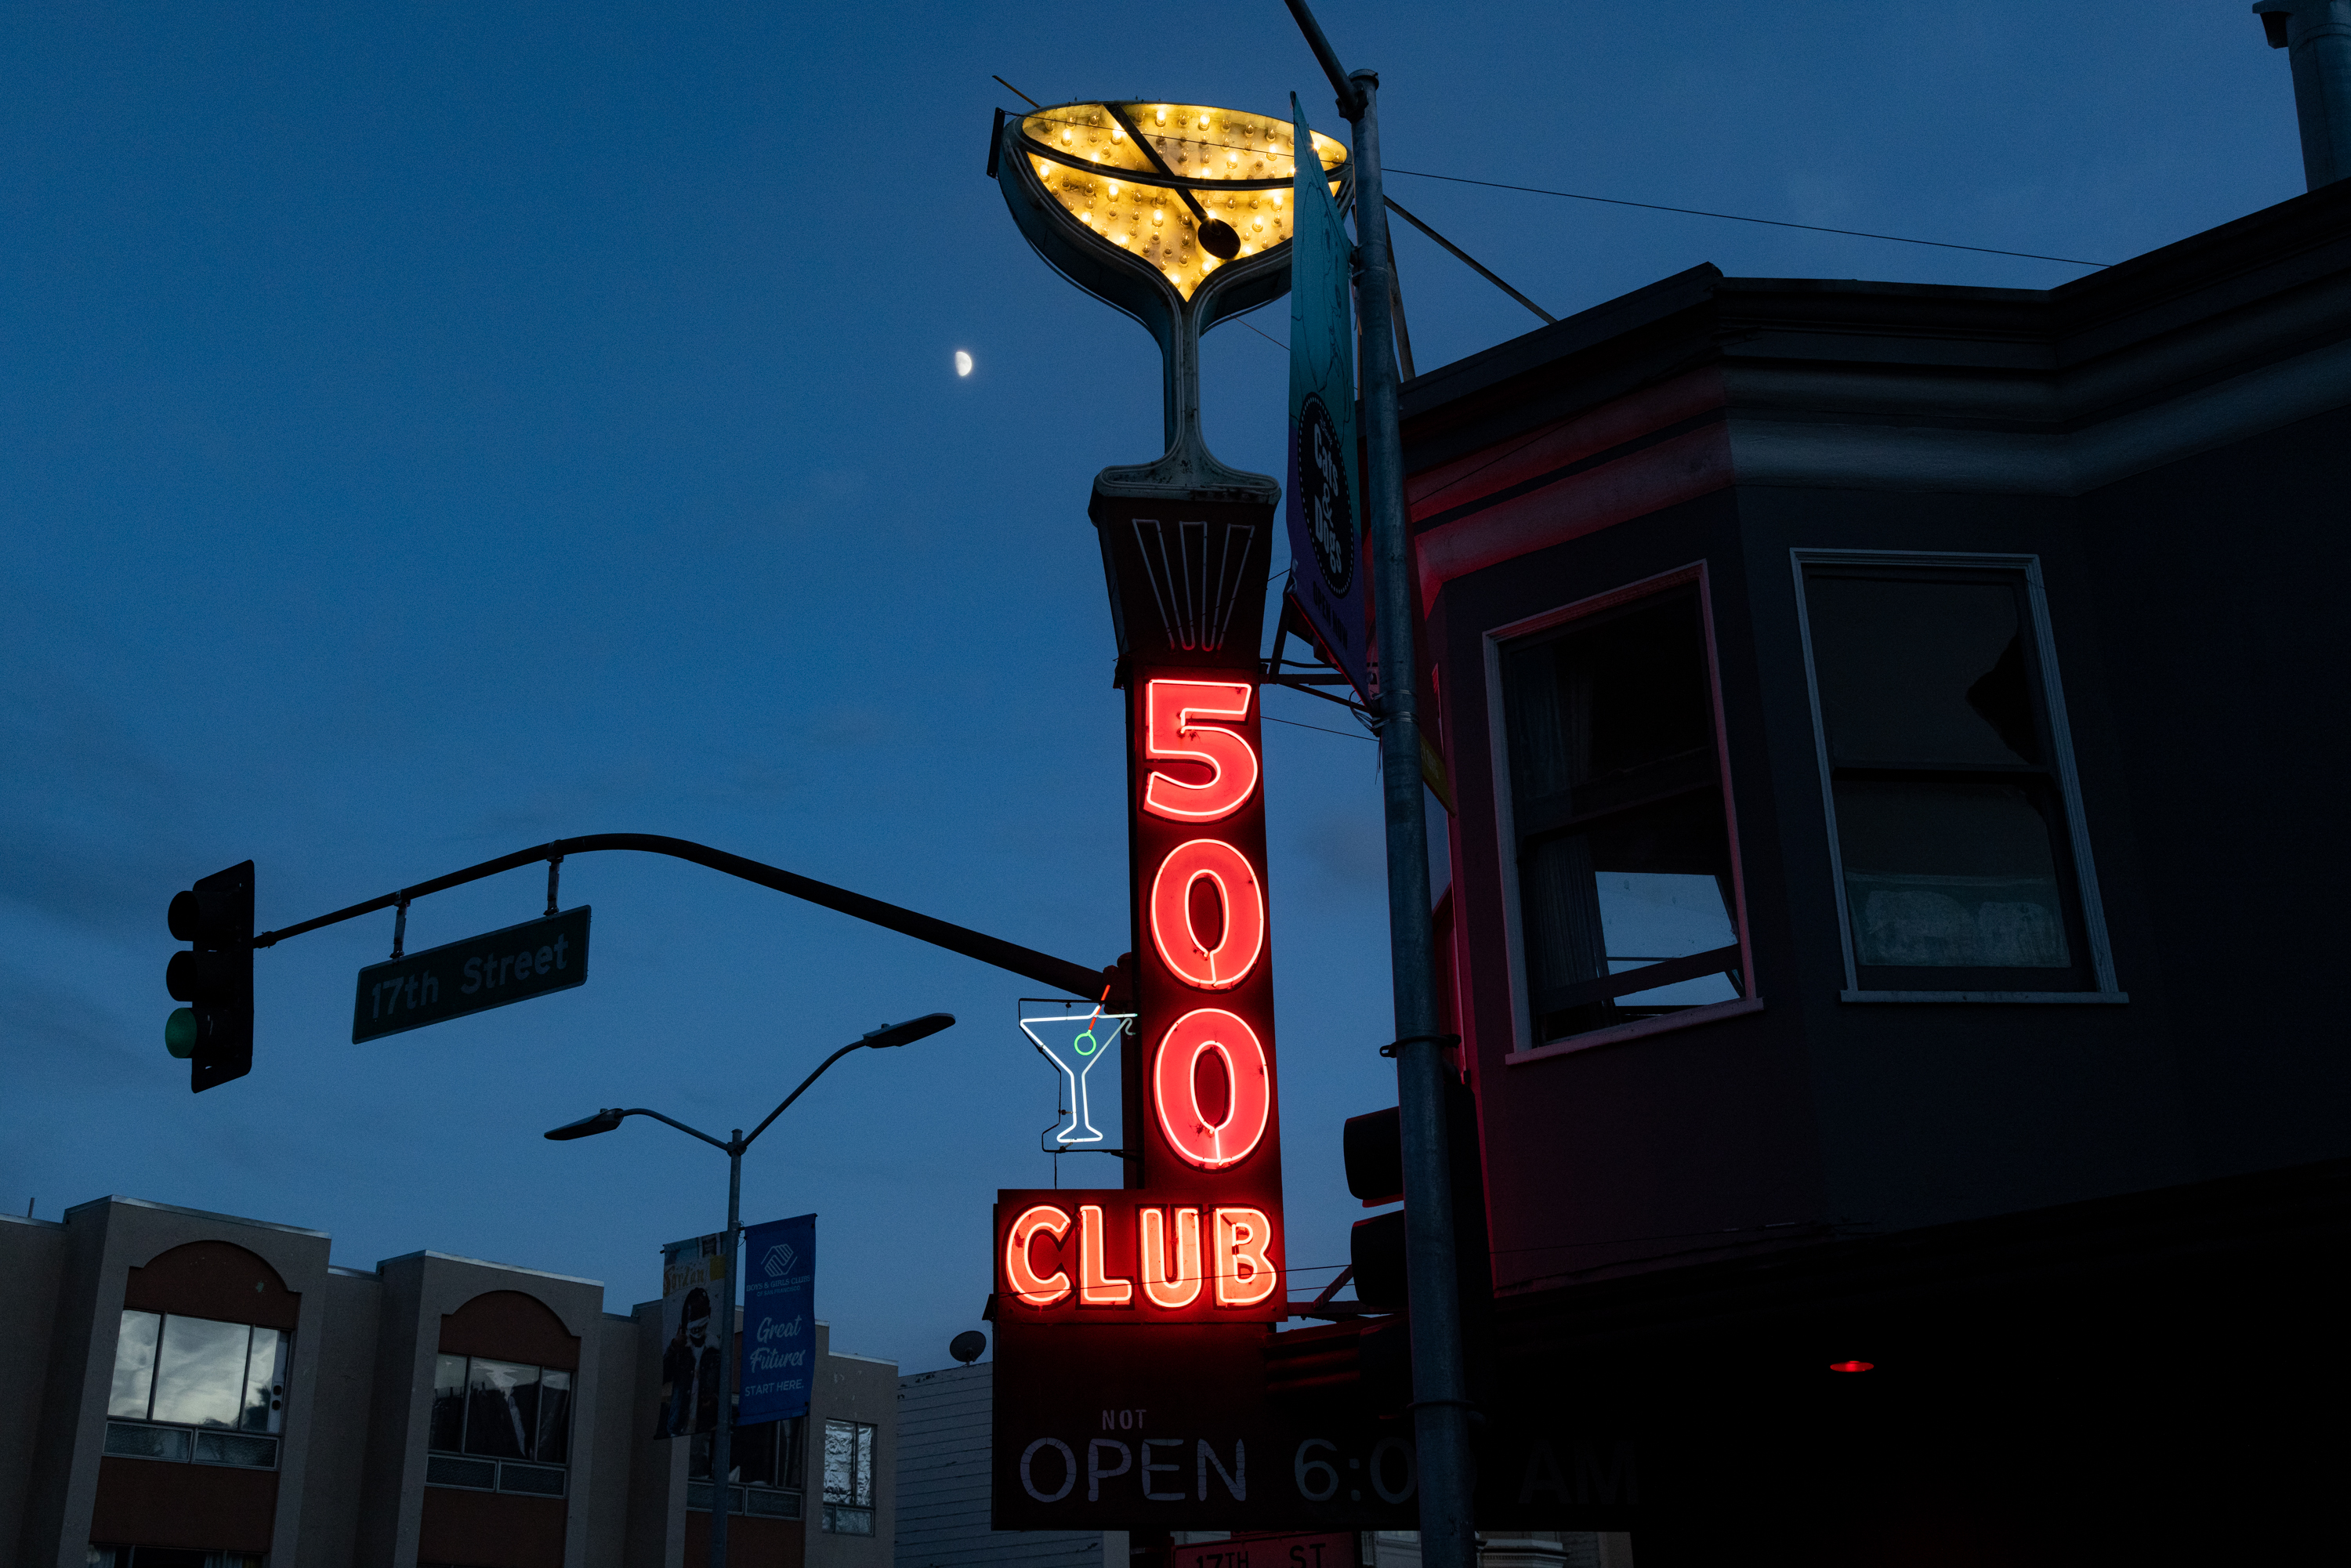 A neon sign at night with a large cocktail glass on top with the words &quot;500 Club&quot; towards the bottom